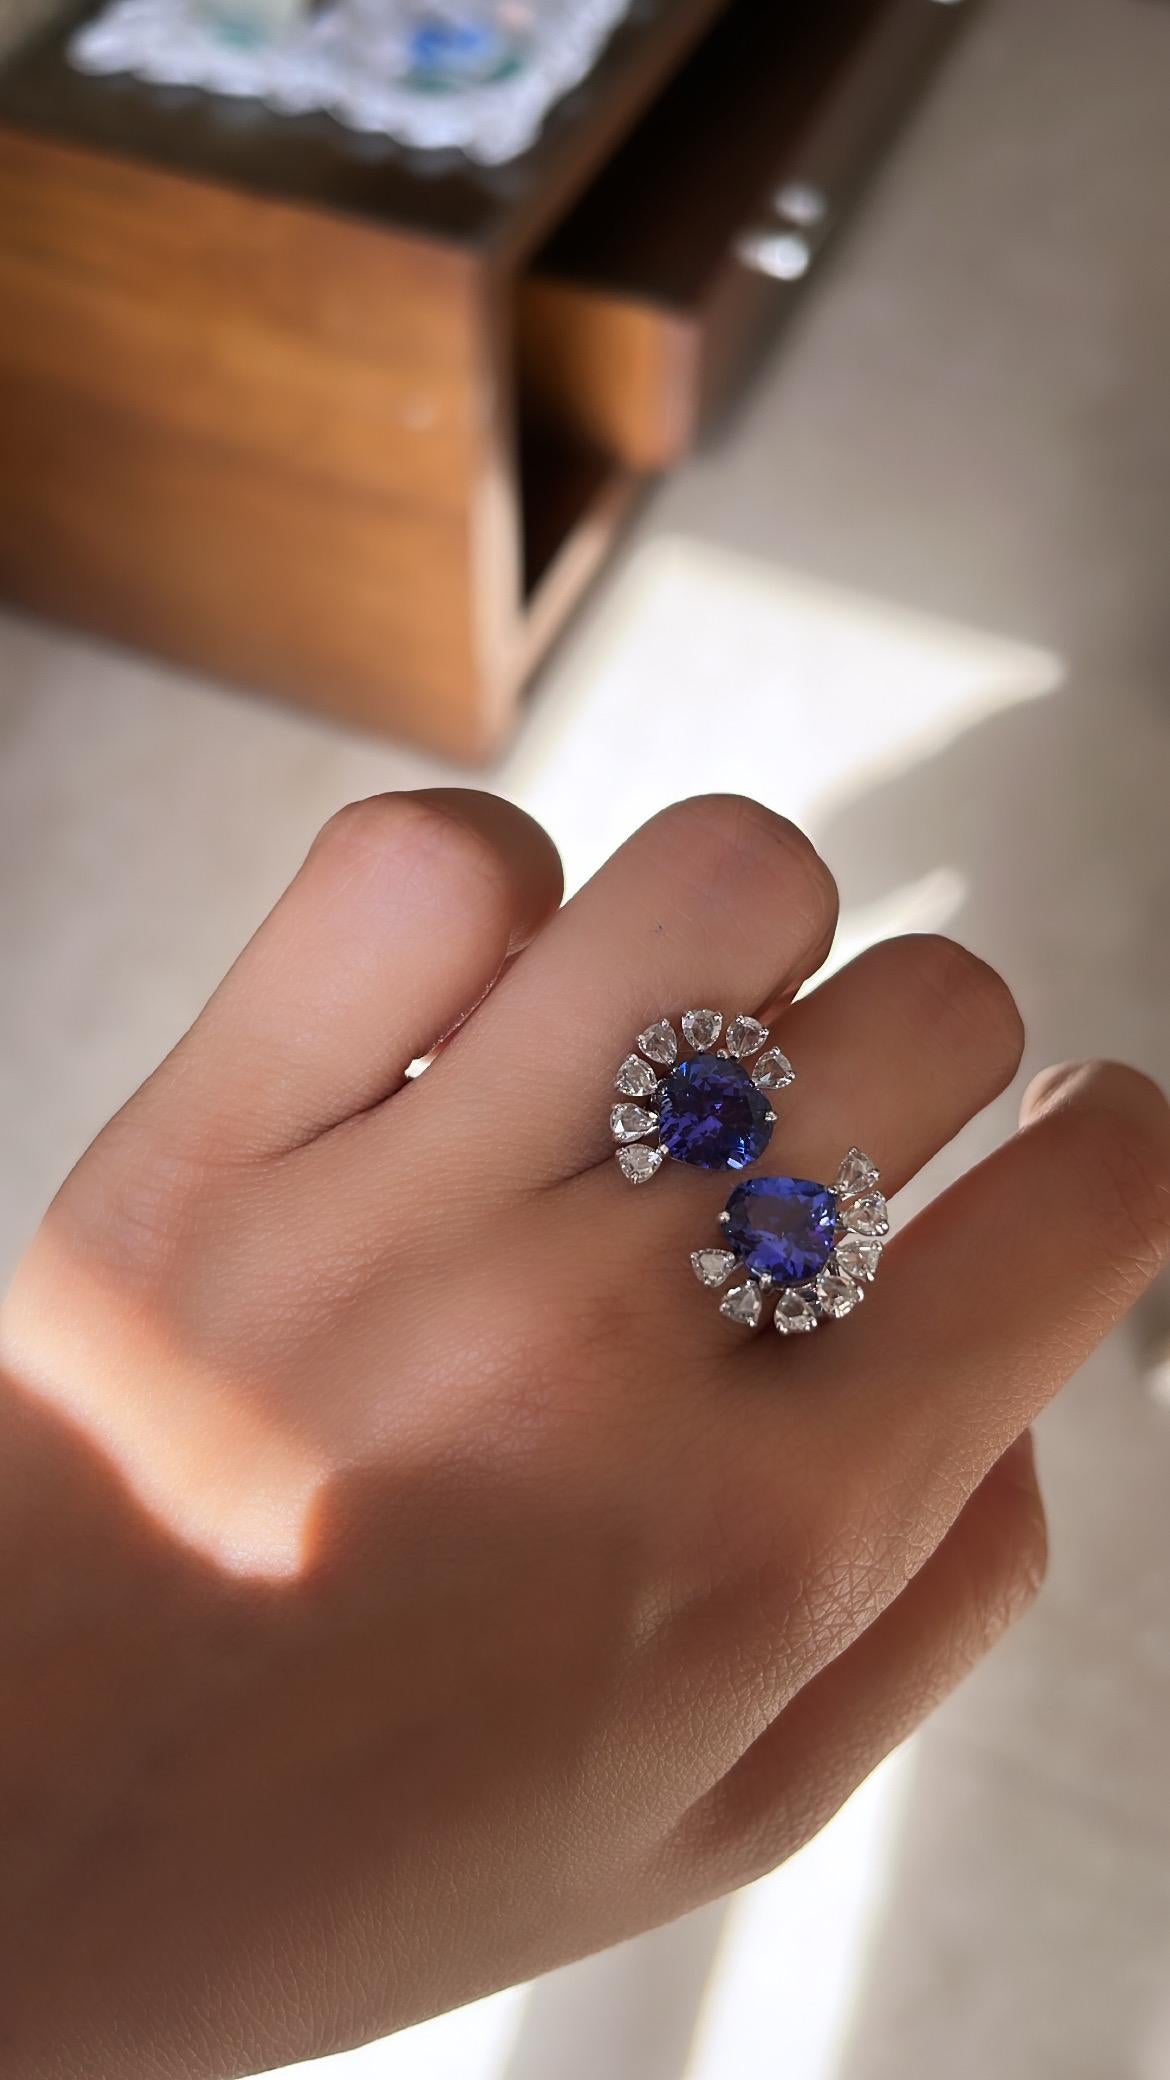 A very gorgeous and one of a kind, Tanzanite Cocktail/ Engagement Ring set in 18K Gold & Diamonds. The weight of the heart shaped Tanzanites is 5.01 carats. The Tanzanites are ethically sourced from Tanzania & are free of any conflict. The weight of